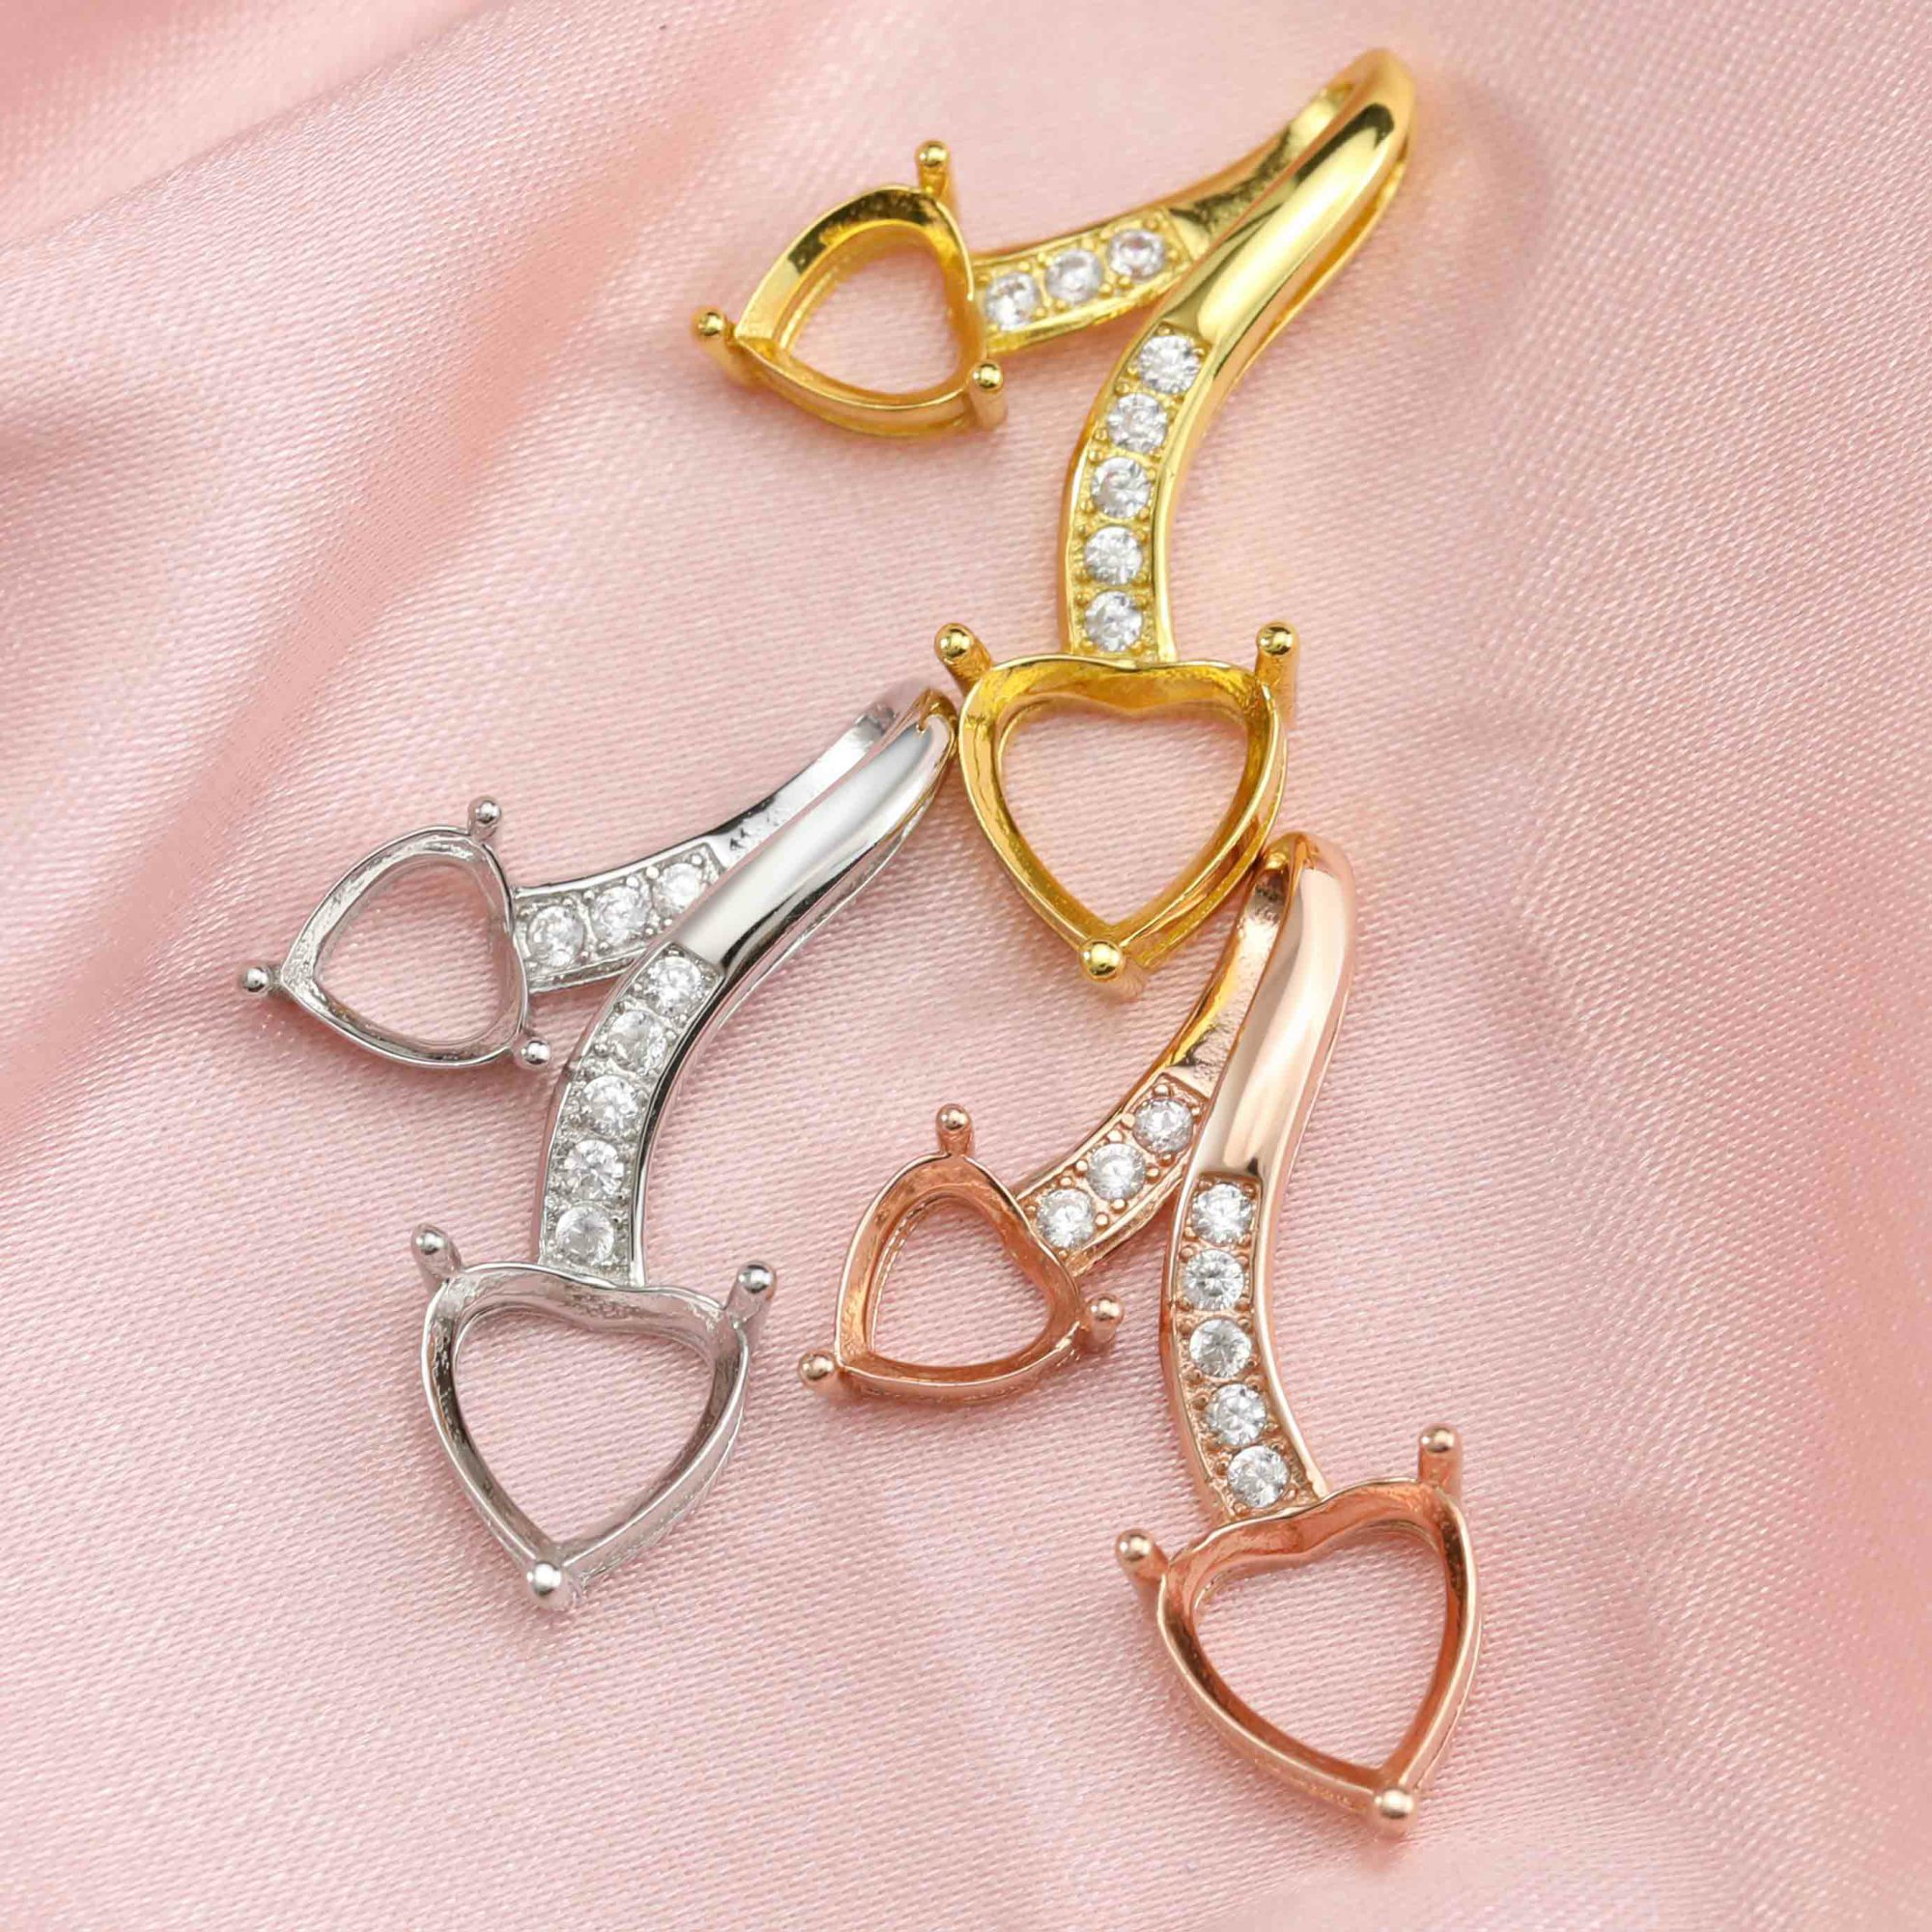 6/8MM Heart Prong Pendant Settings Solid 14K/18K Gold Bezel Two Stones Charm for DIY Gemstone Memory Jewelry Supplies 1431129-1 - Click Image to Close